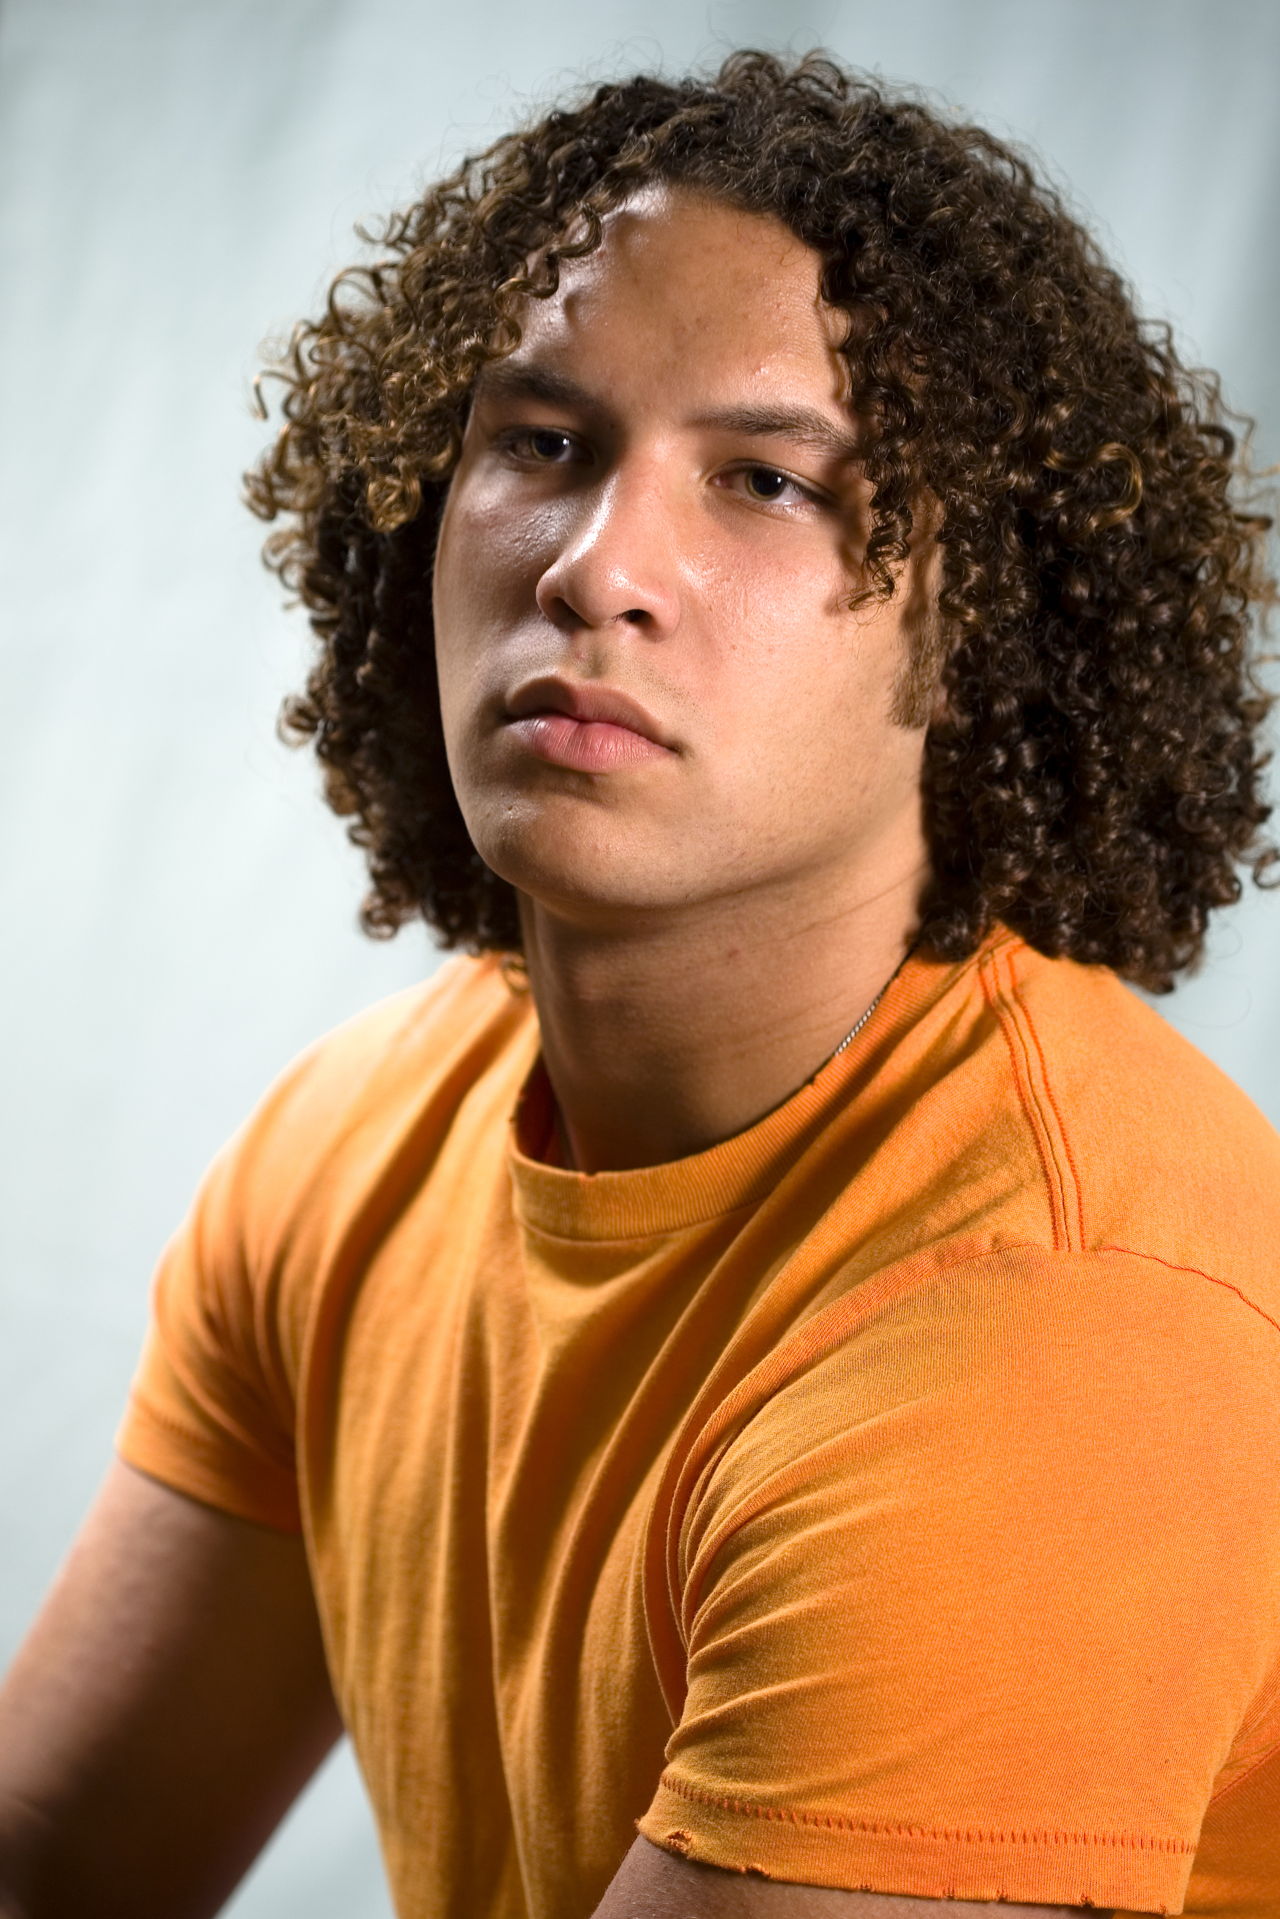 man perms are a thing! various perm cues for men to look